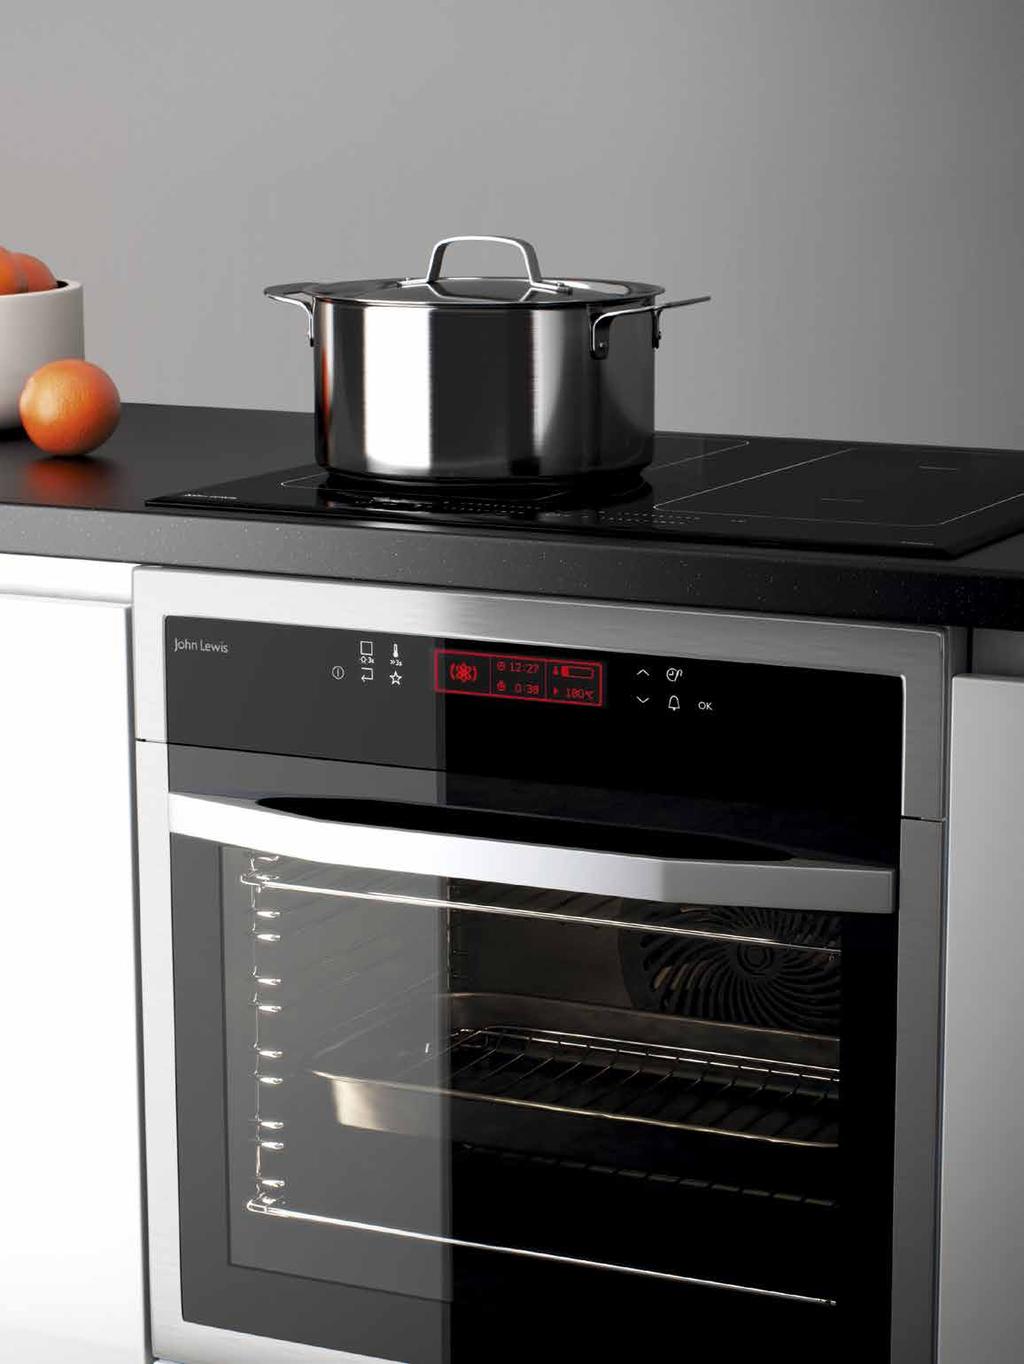 induction ceramic hob JLBIIH605 Stock number 890 20208 499 This fast-heat electric induction hob has four cooking zones, which each adapt automatically to the size and shape of your cookware perfect